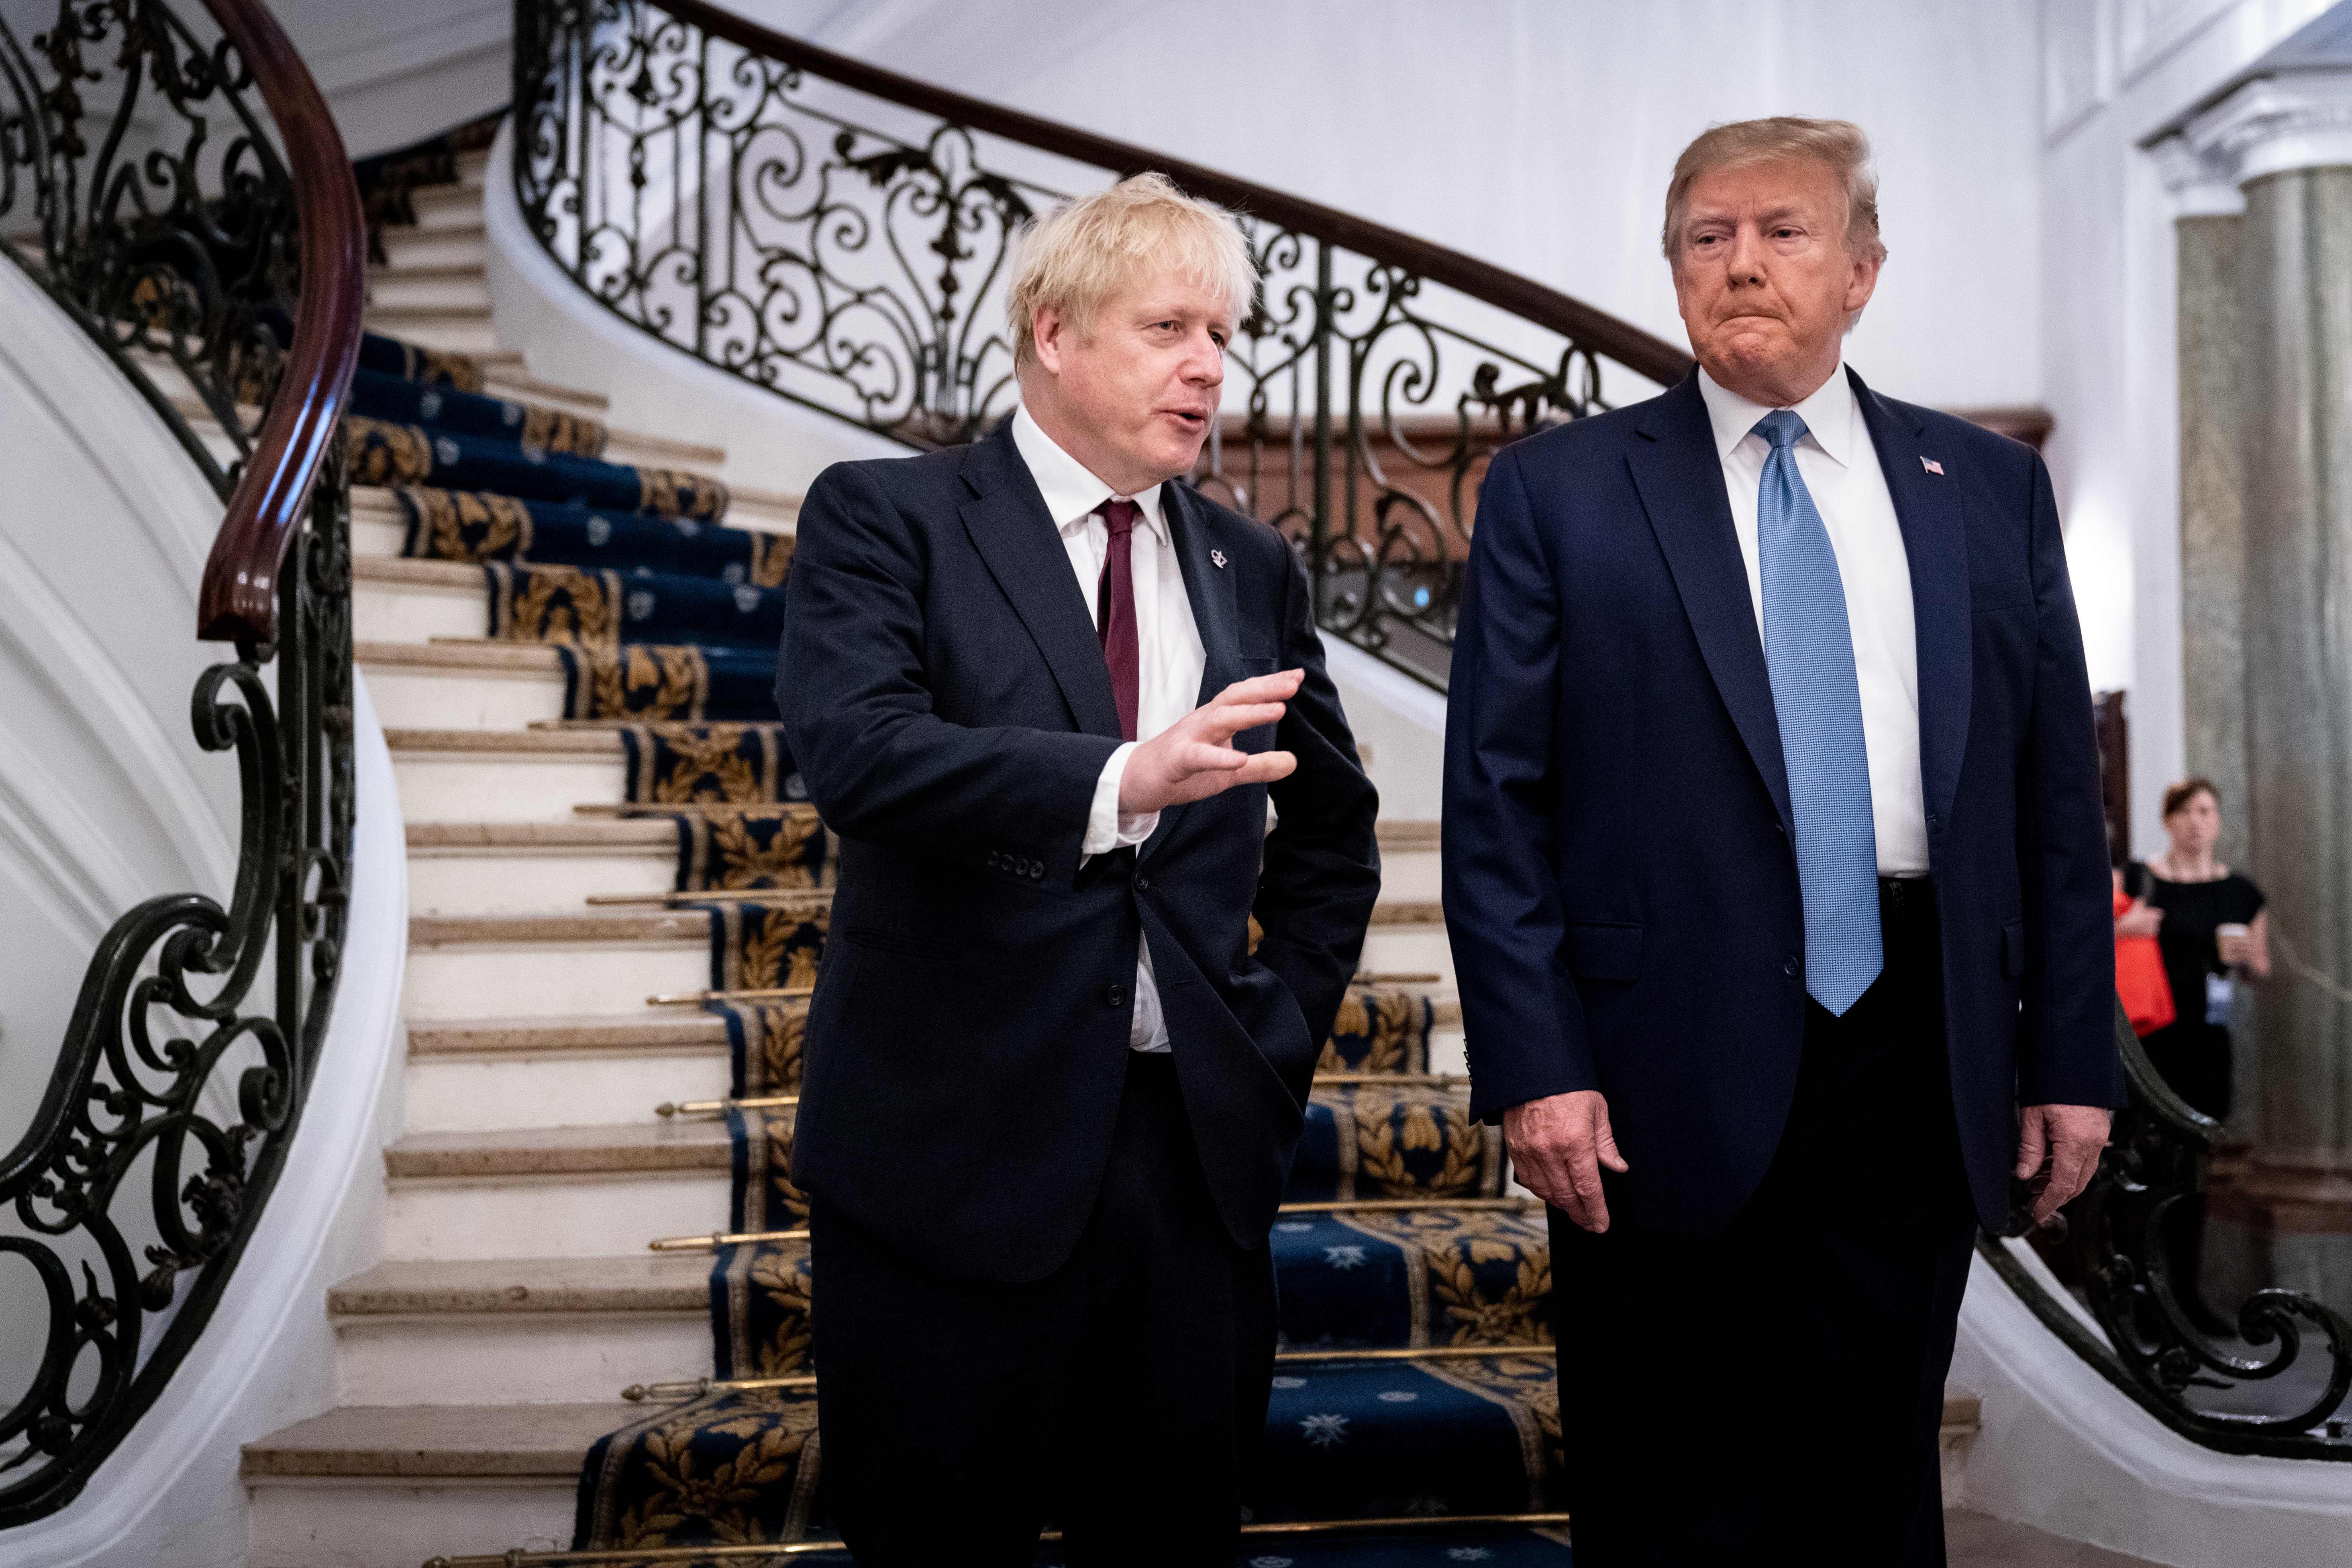 Donald Trump and Boris Johnson speak before a breakfast at the G7 Summit in Biarritz, France